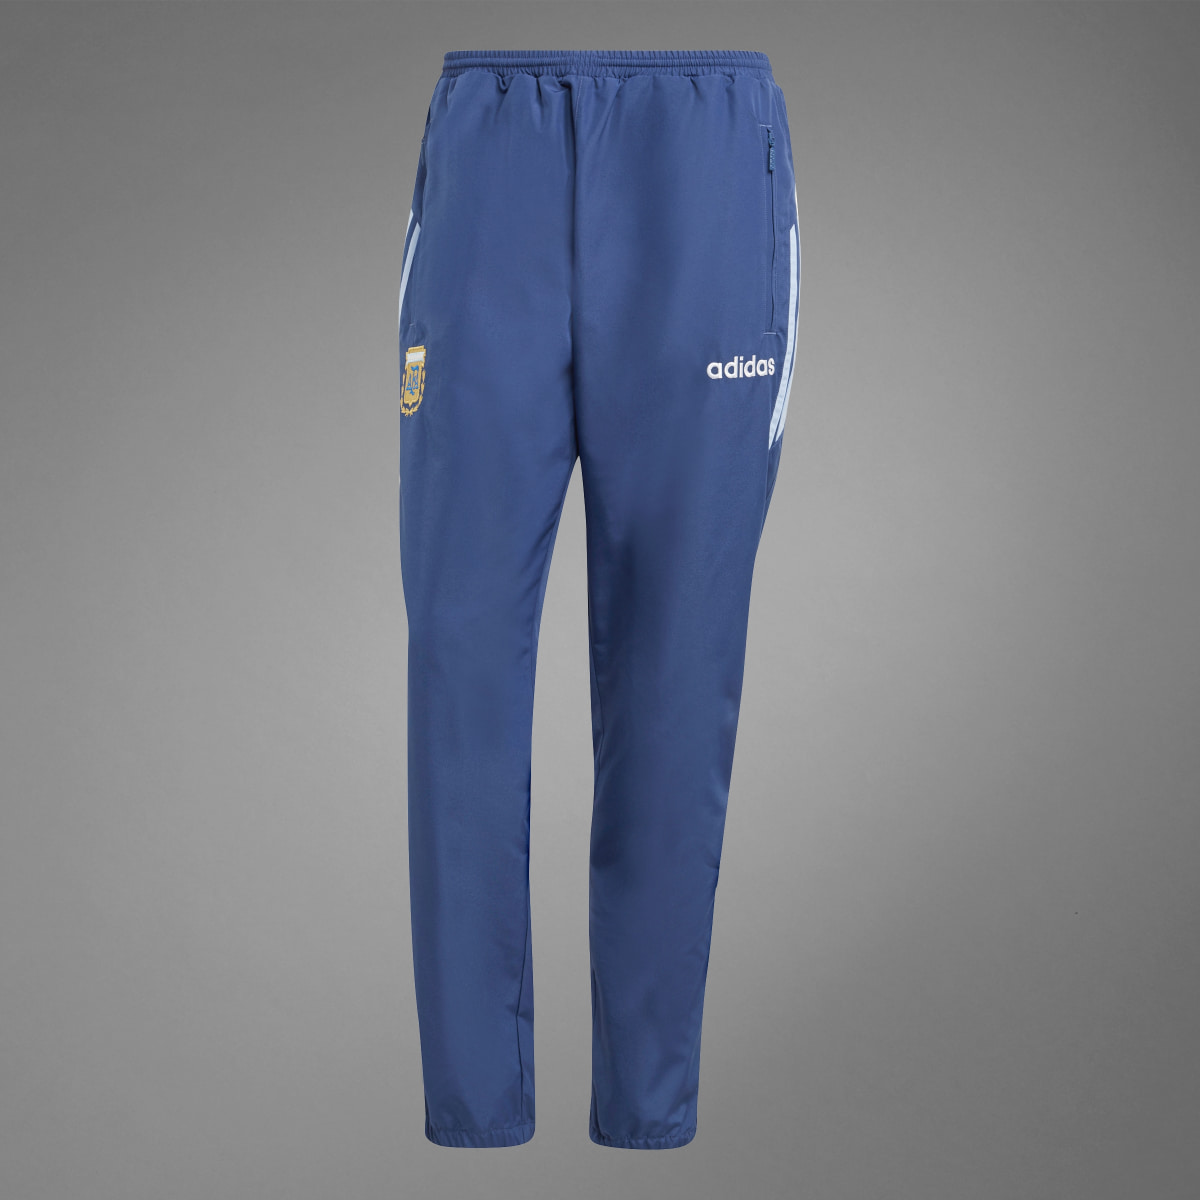 Adidas Argentina 1994 Woven Track Pants. 9